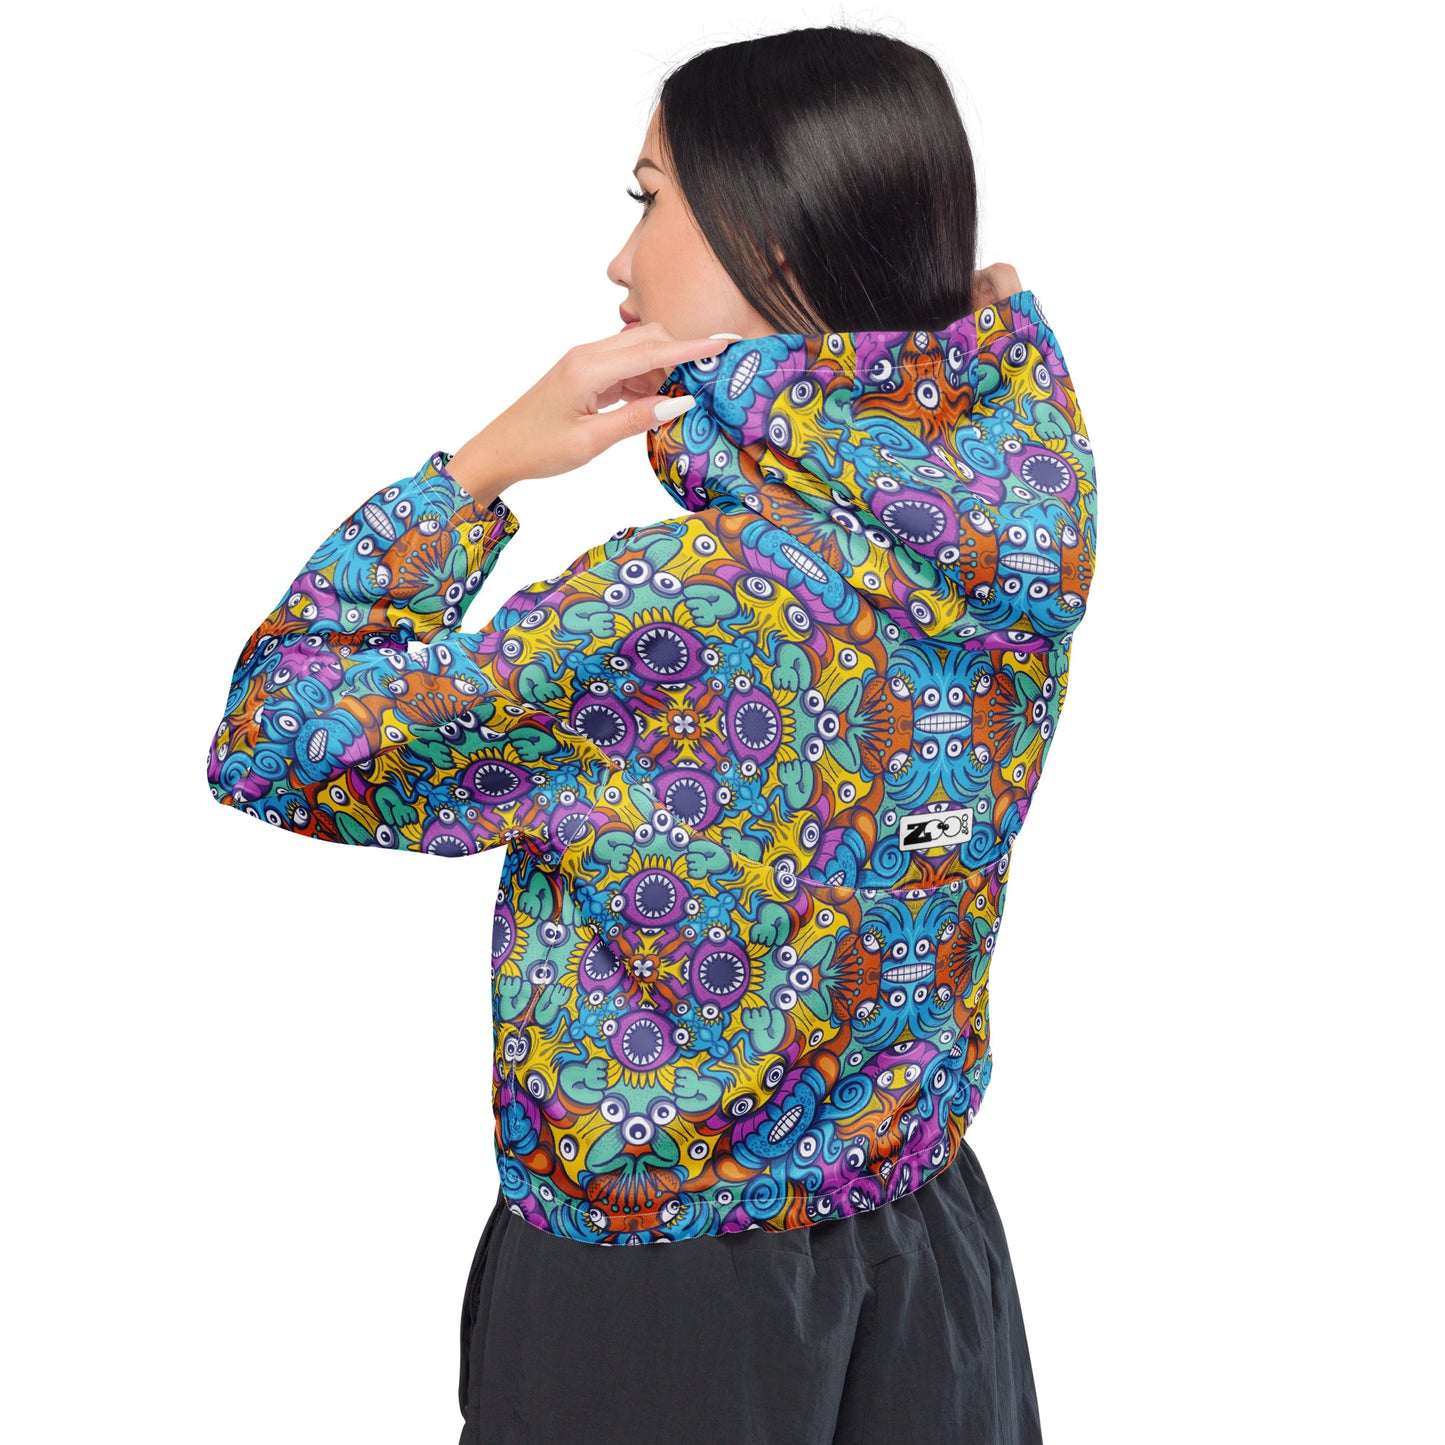 The ultimate sea beasts cast from the deep end of the ocean - Women’s cropped windbreaker. Back view